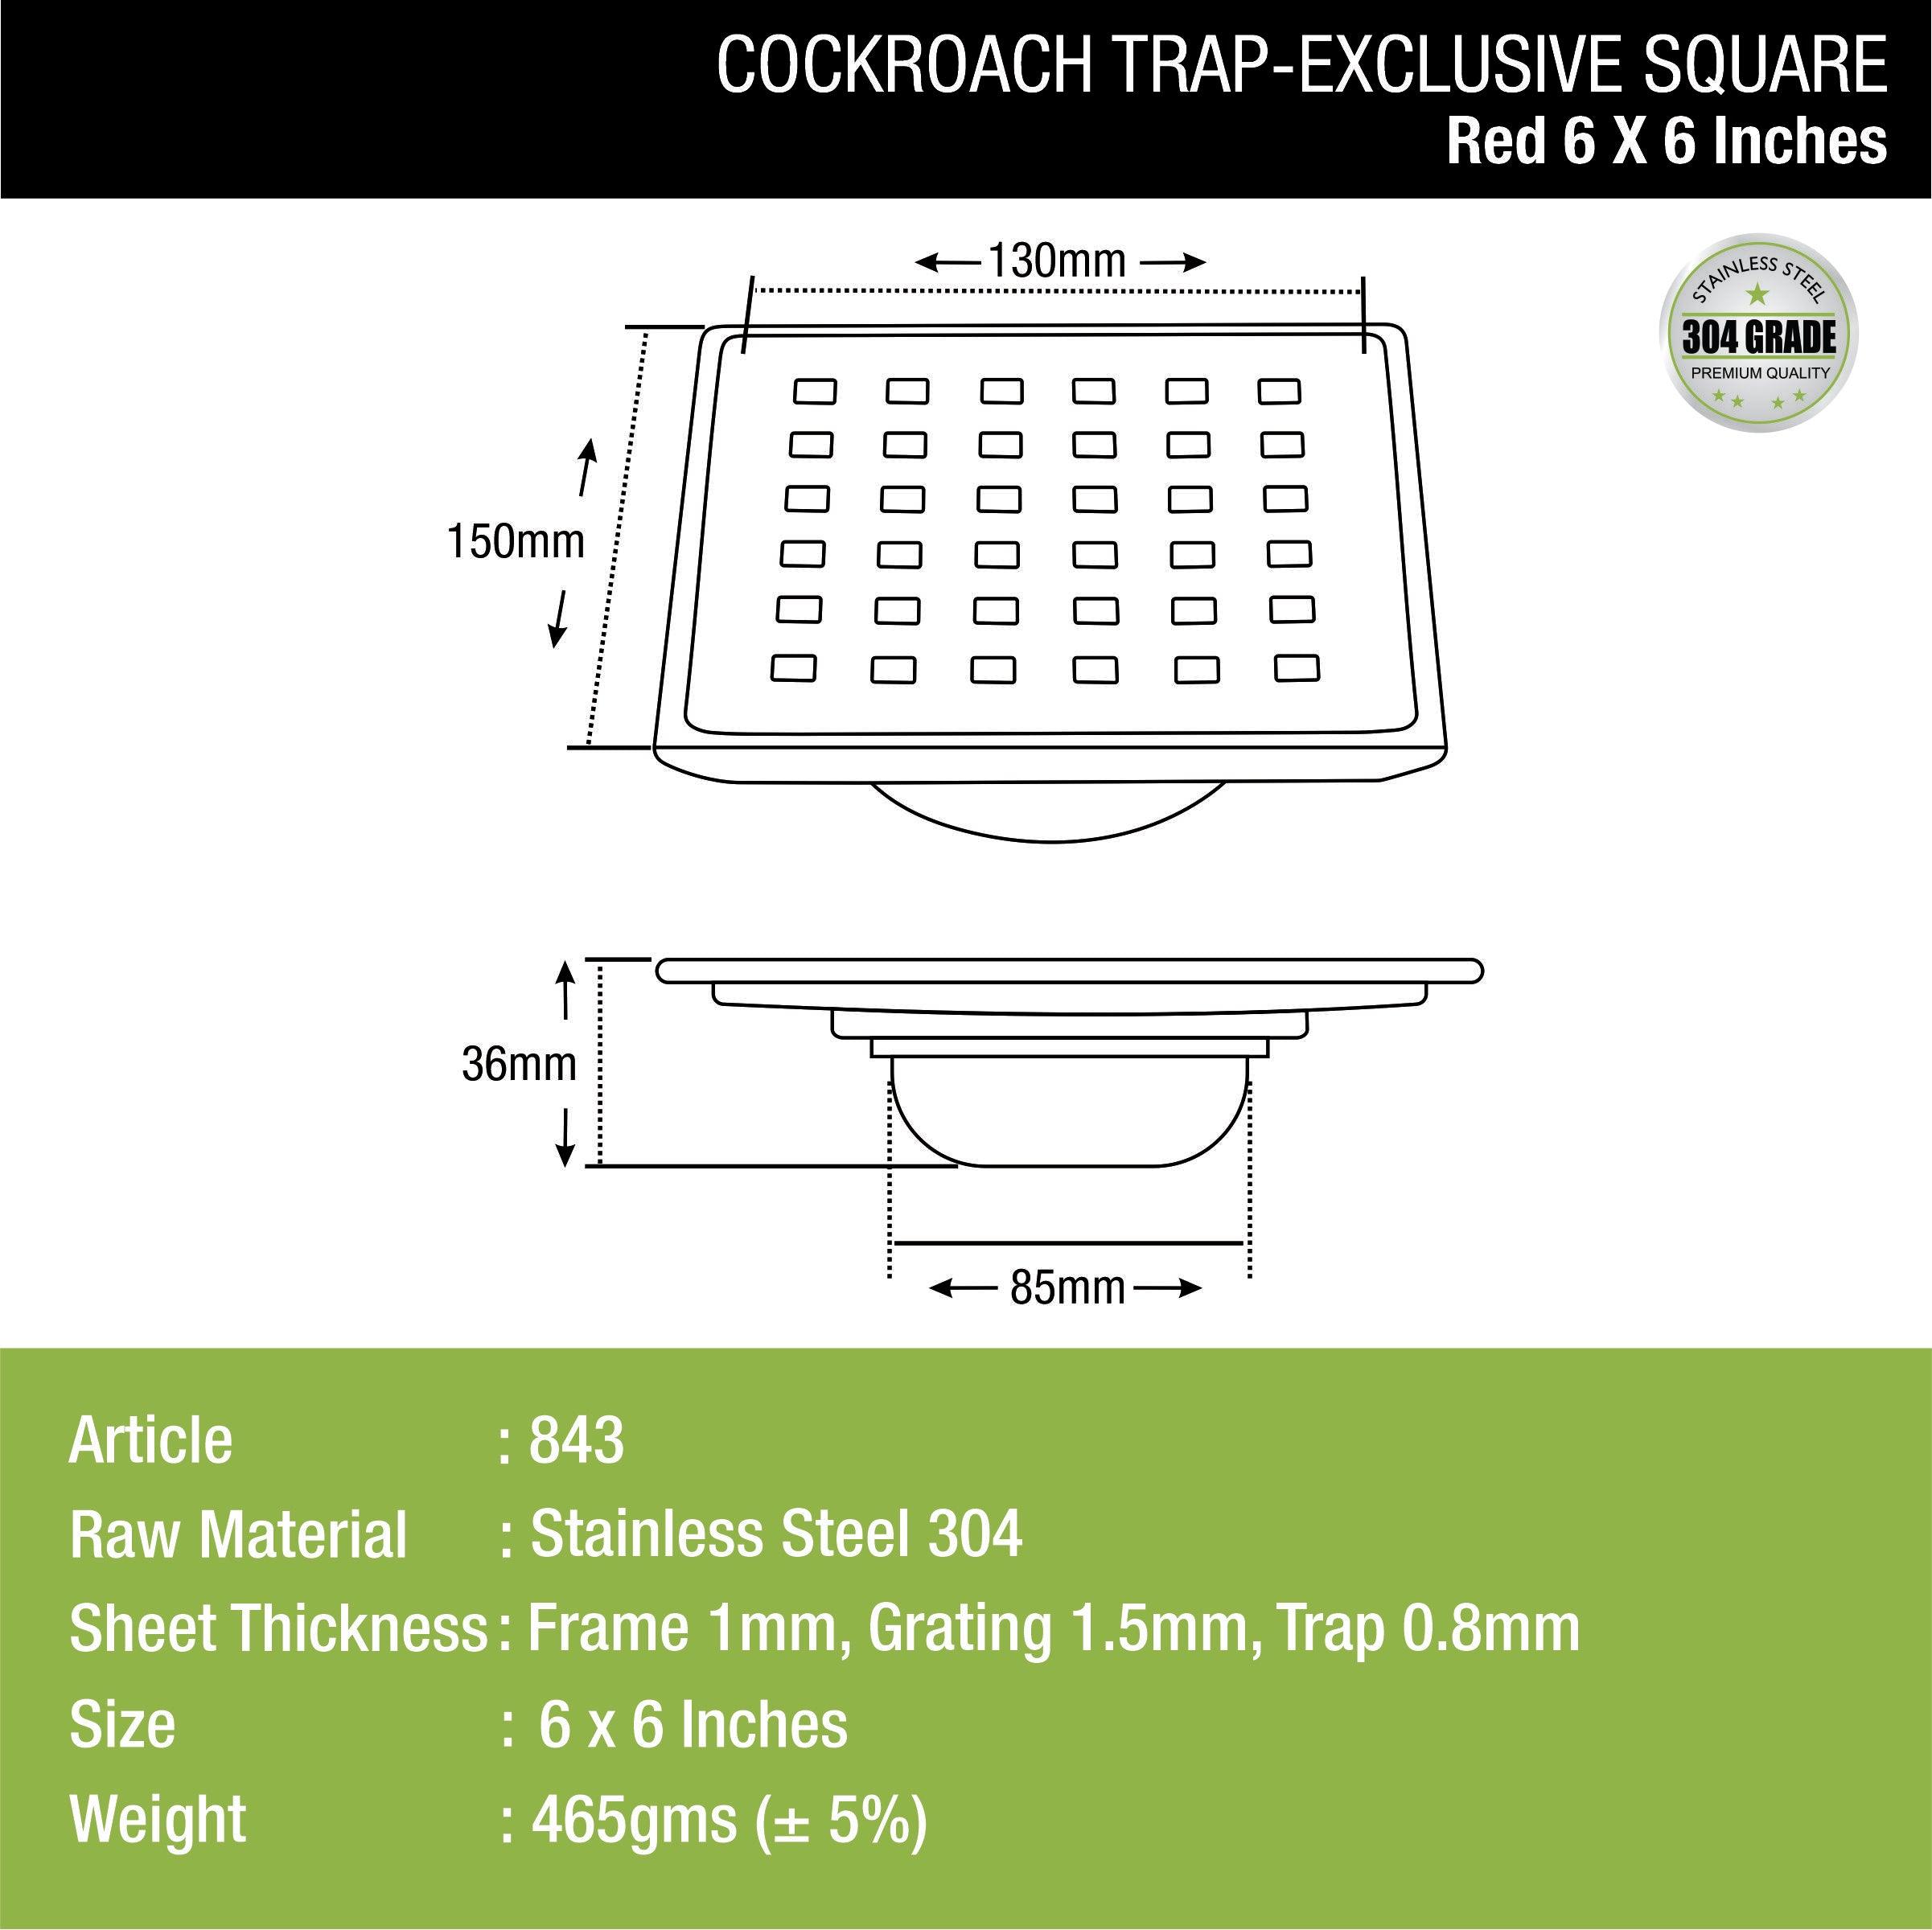 Red Exclusive Square Floor Drain (6 x 6 Inches) with Cockroach Trap dimensions and sizes